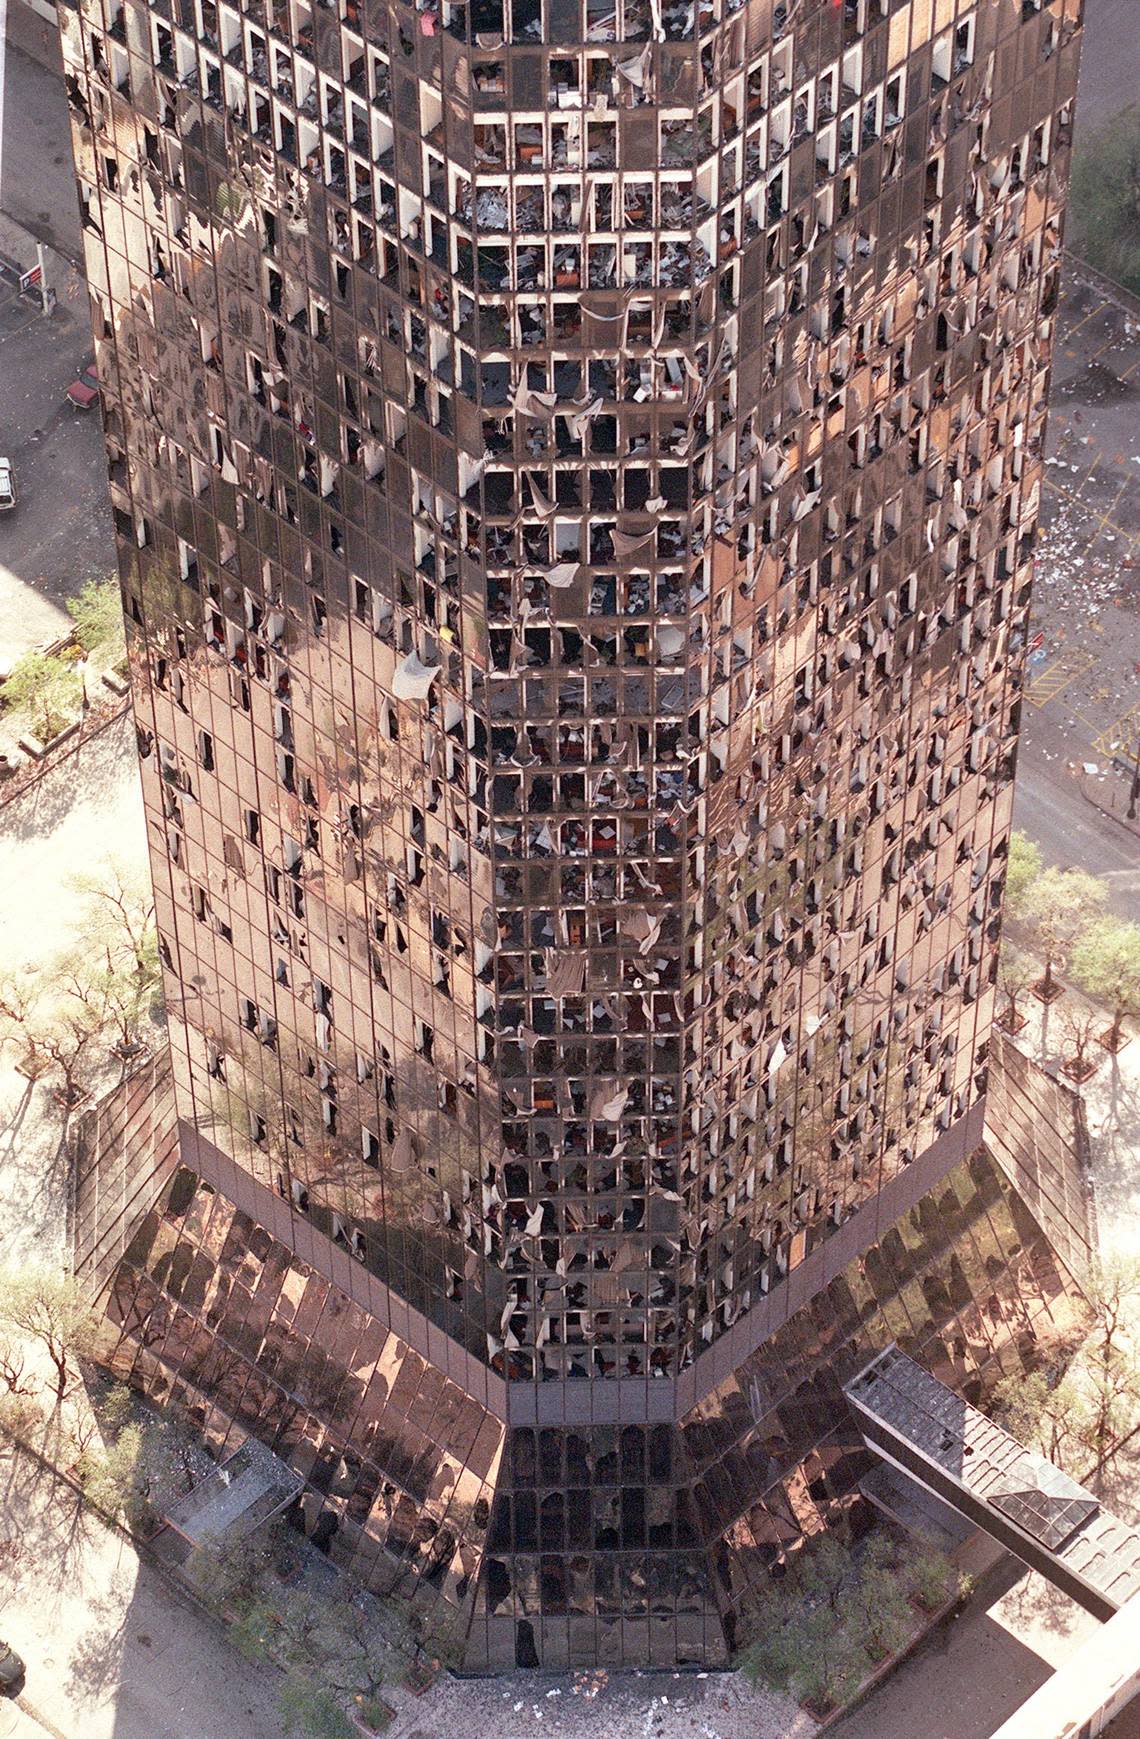 Overhead view of the Bank One tower on March 29, 2000.